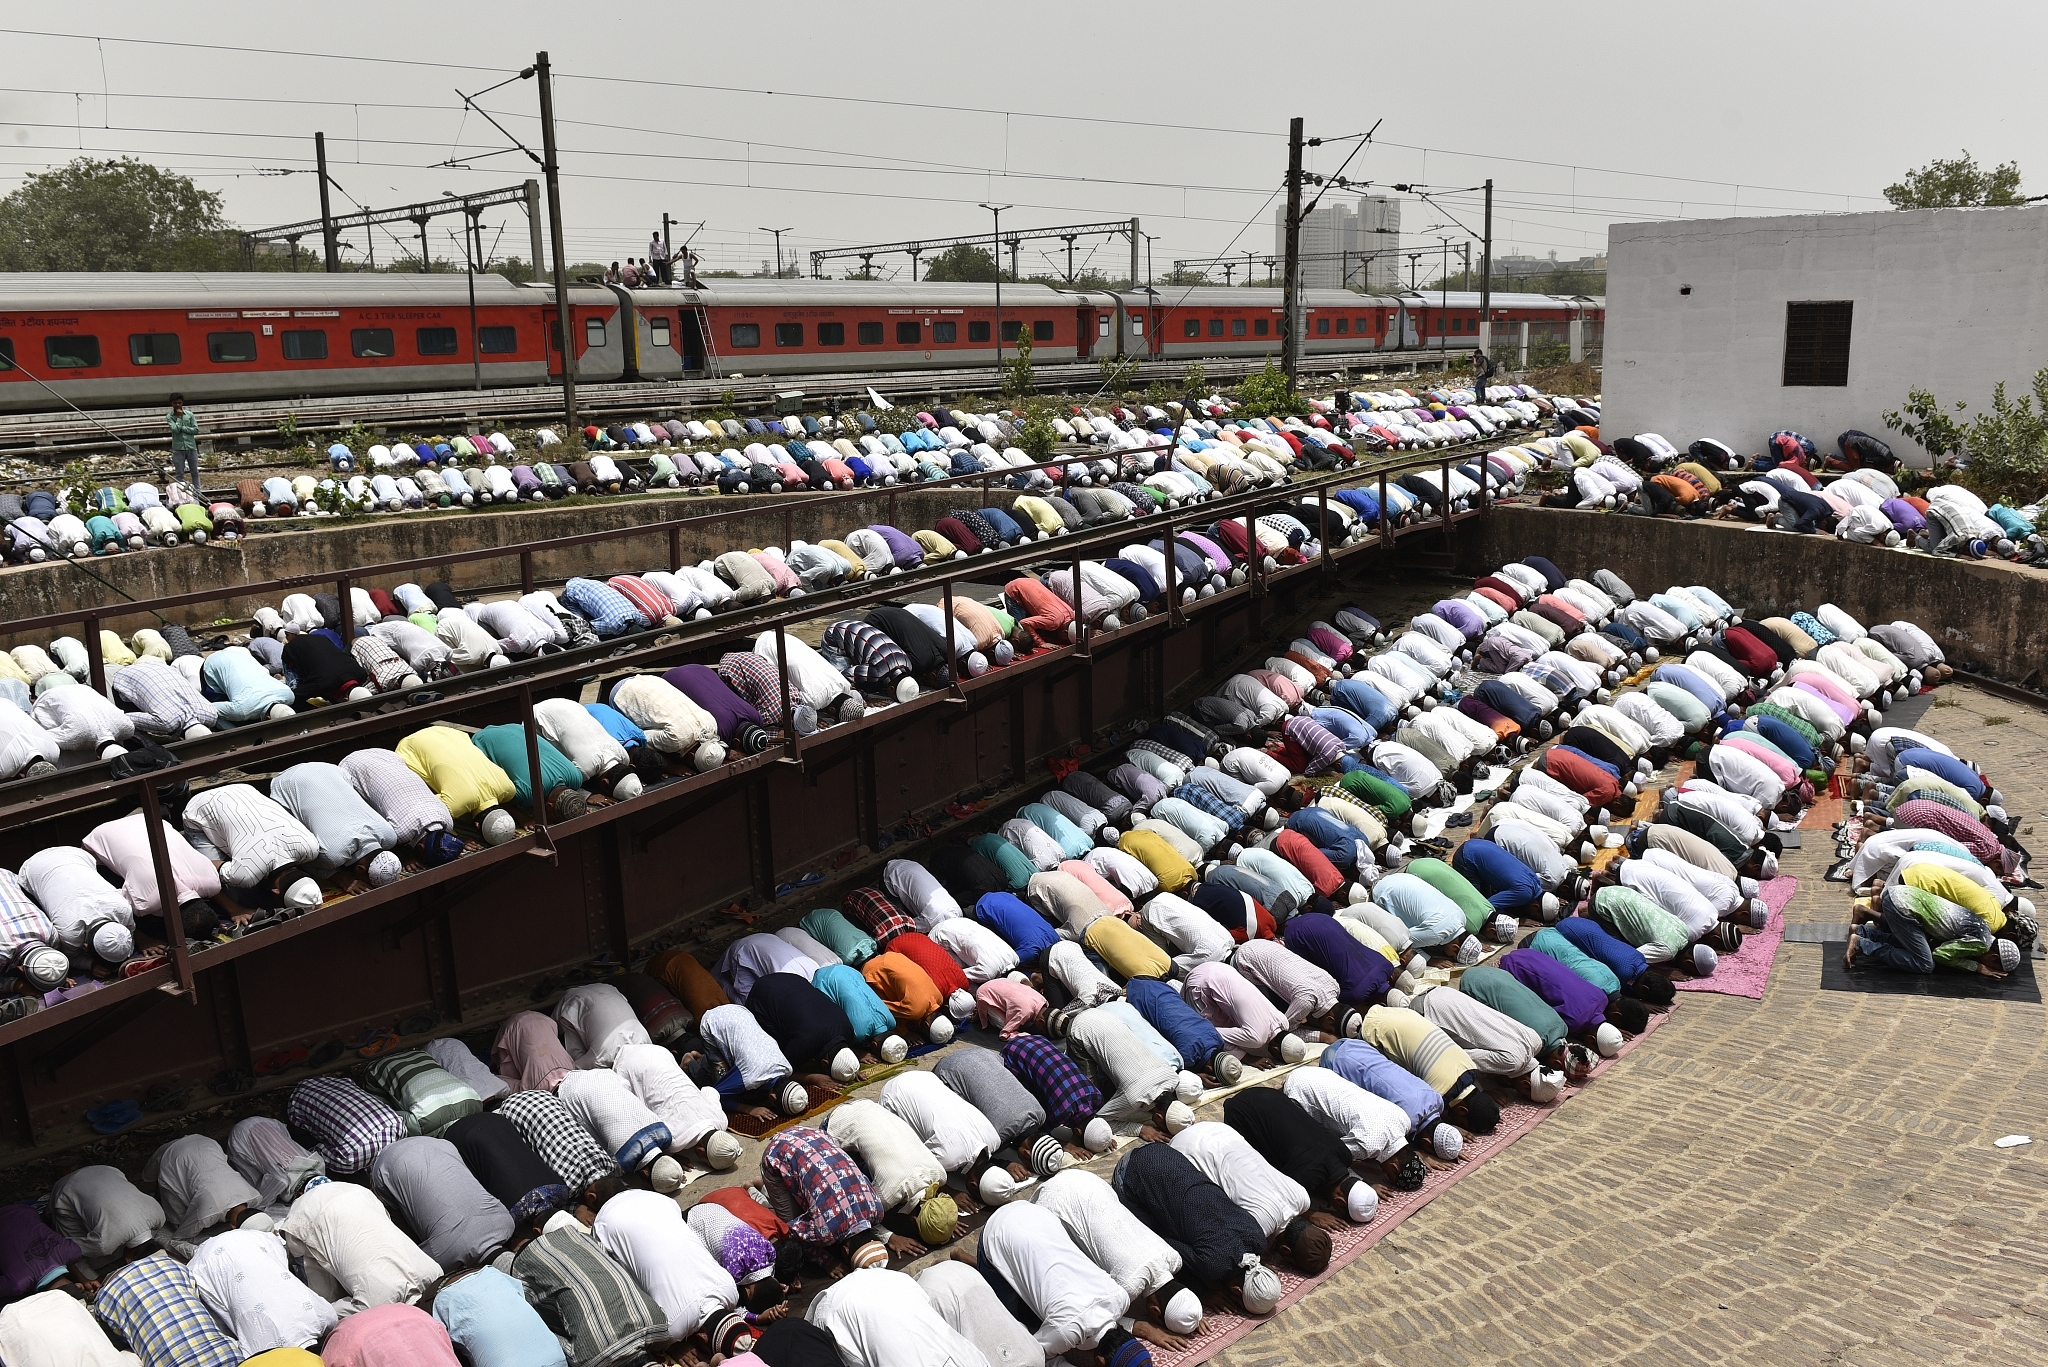 Devotees take part in the afternoon prayers  at the railway yard of the New Delhi Railway Station. (Sanchit Khanna/Hindustan Times via Getty Images)